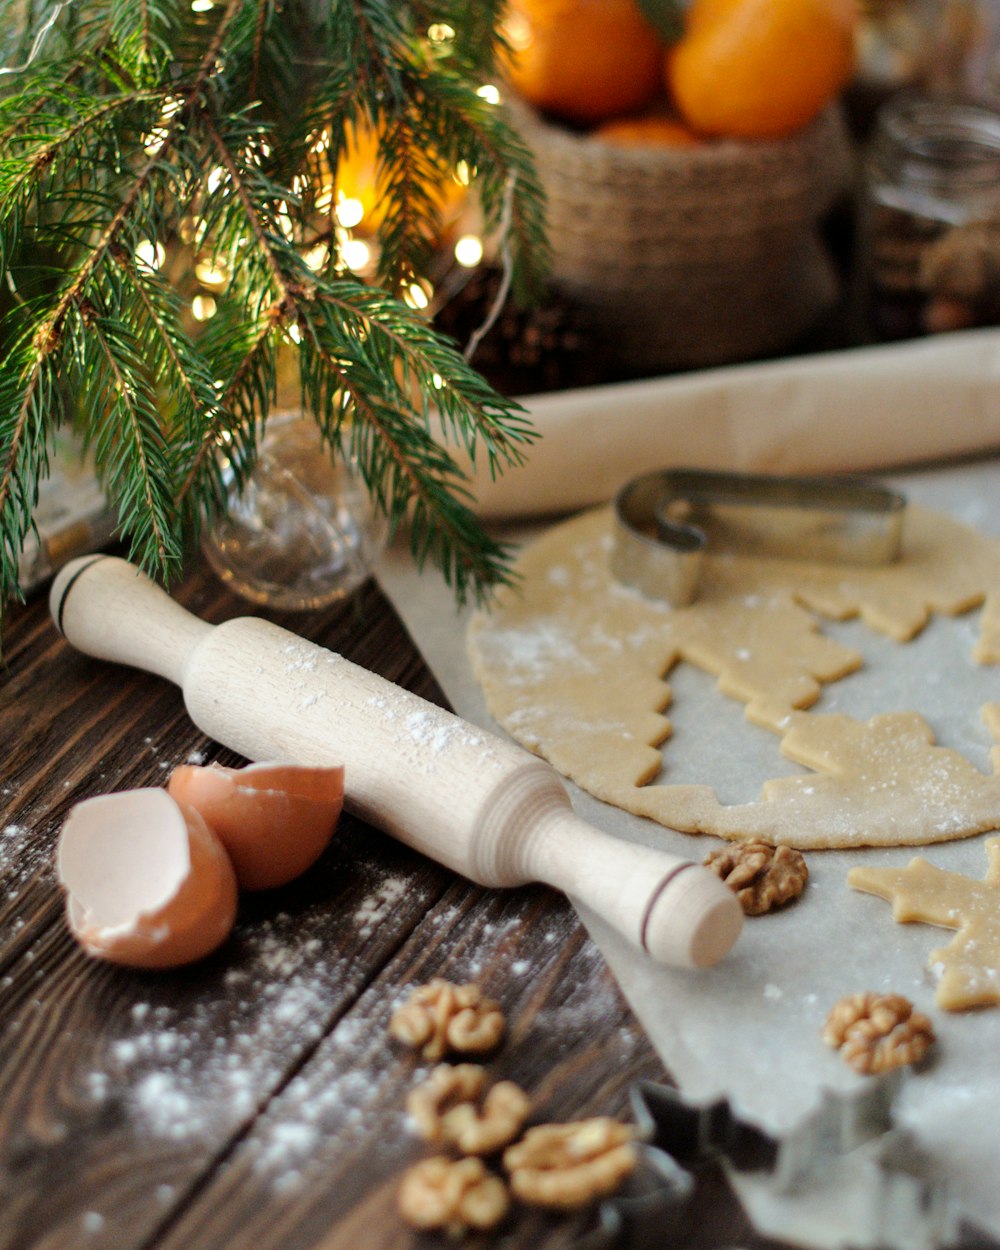 white wooden rolling pin near dough, egg shell, orange fruits, and walnuts